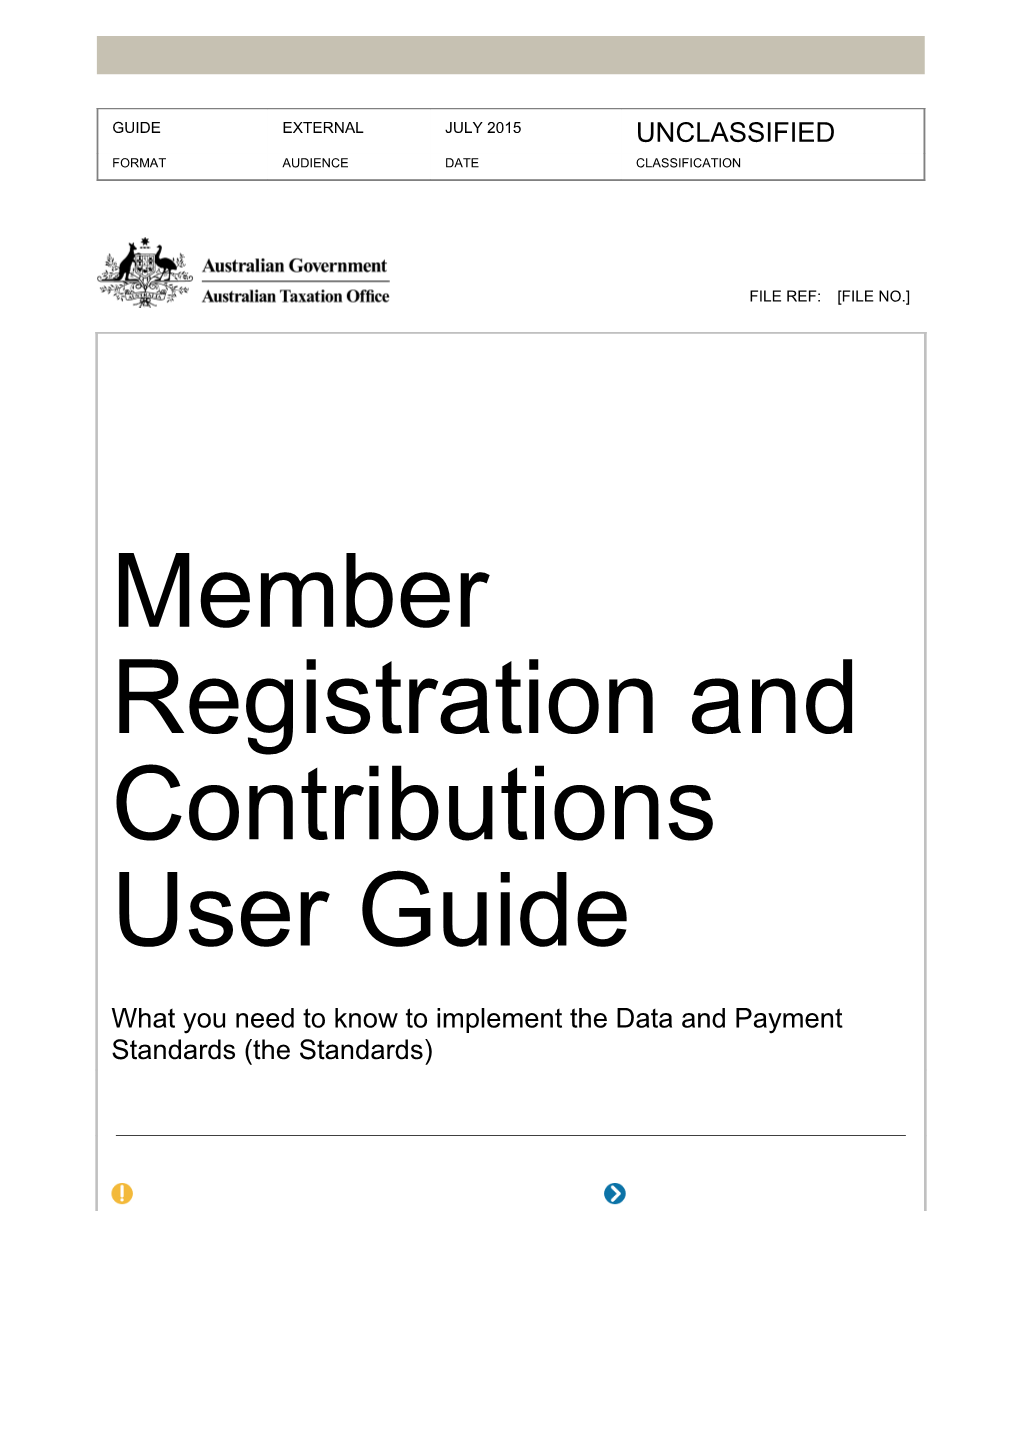 Registration and Contribution User Guide